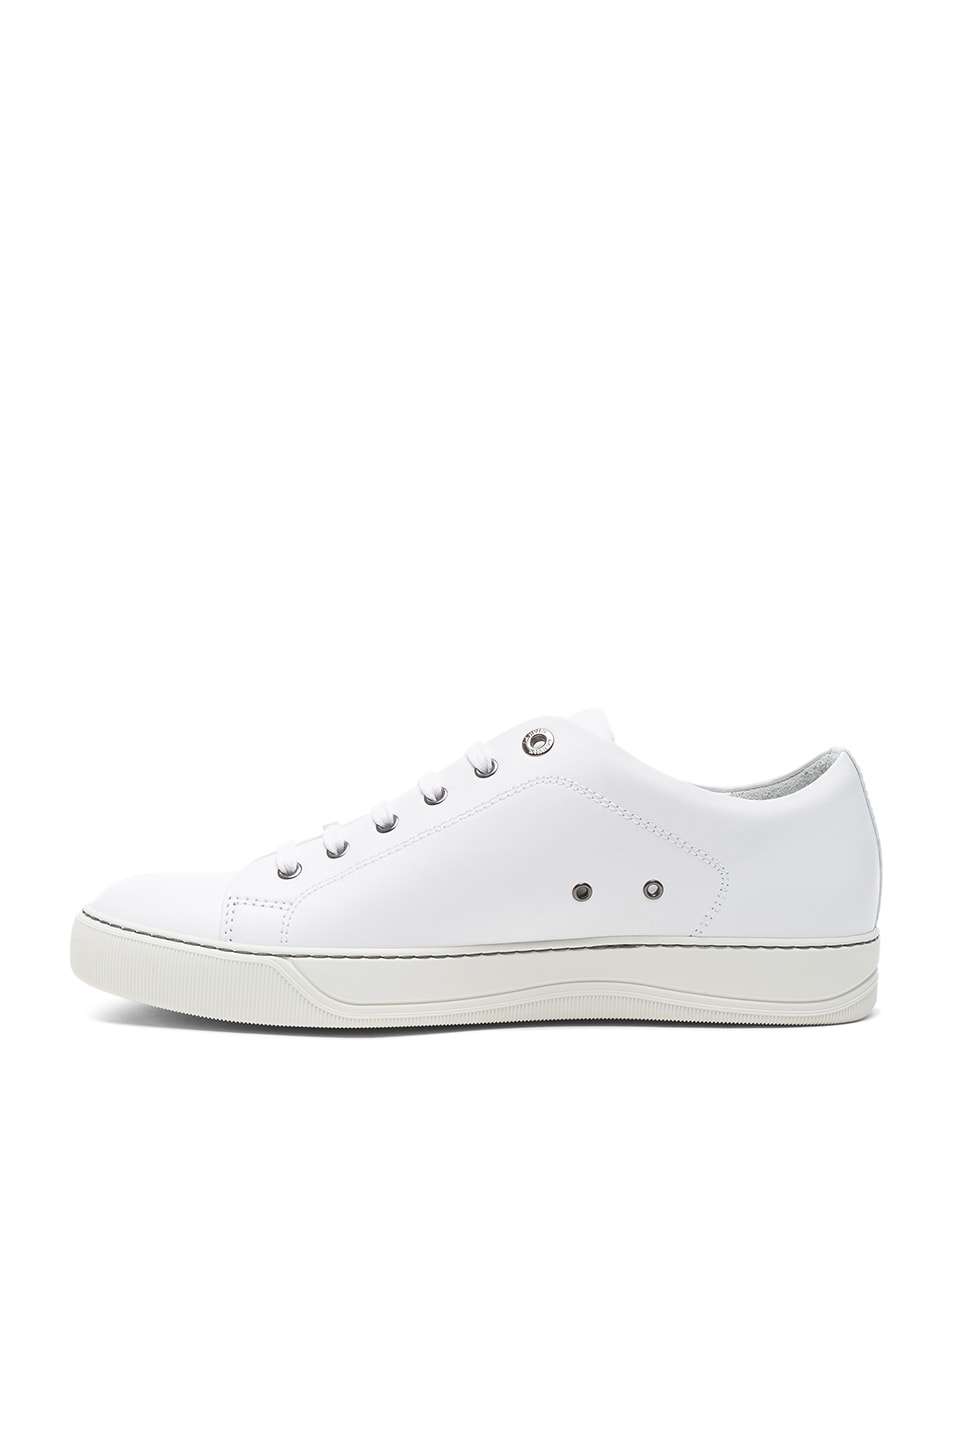 LANVIN Leather Low-Top Trainers in White | ModeSens